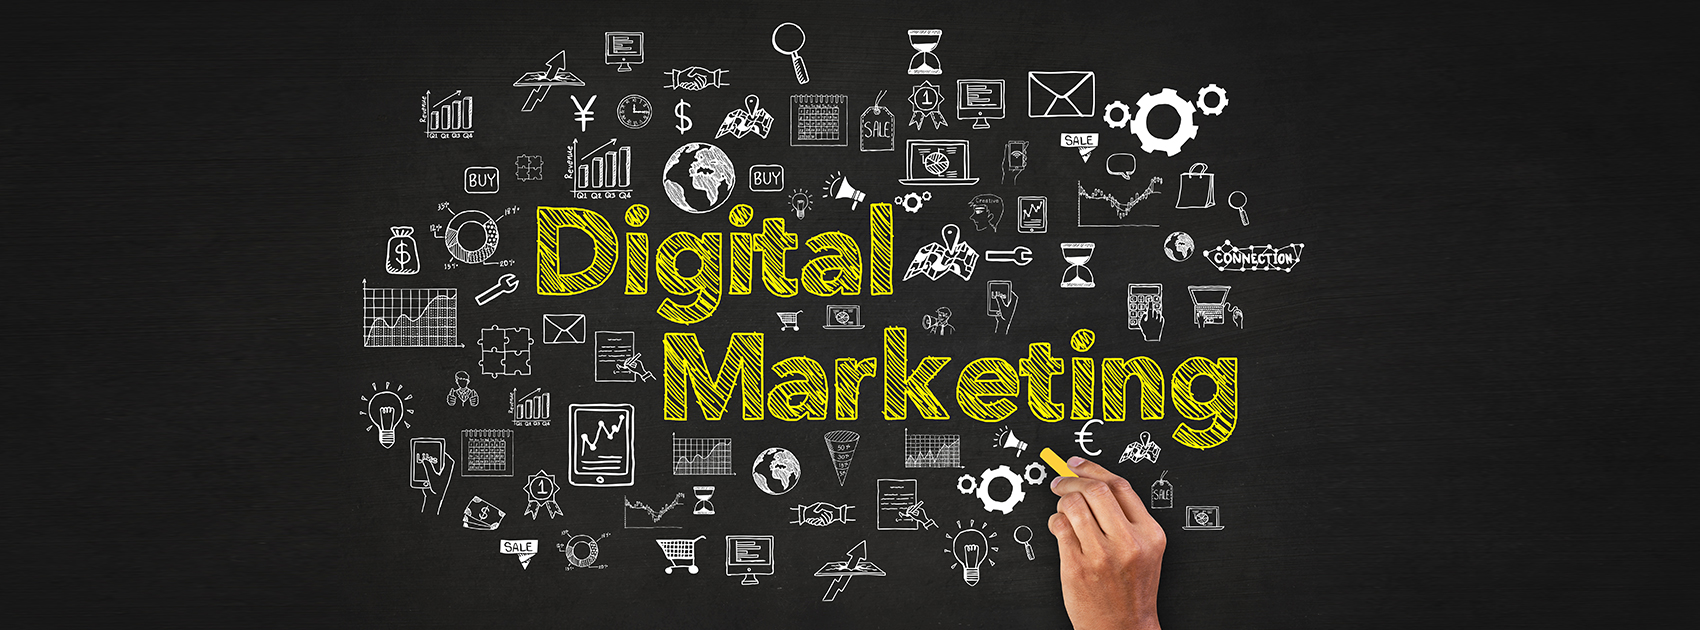 Different Forms Of Digital Marketing,Startup Stories,Latest Business News 2019,Types of Digital Marketing,Digital Marketing Latest News,Digital Marketing Platforms,Digital Marketing Strategy 2019,Digital Marketing Activities,Role of Digital Marketing,Social Media Marketing,Search Engine Optimization,Search Engine Marketing